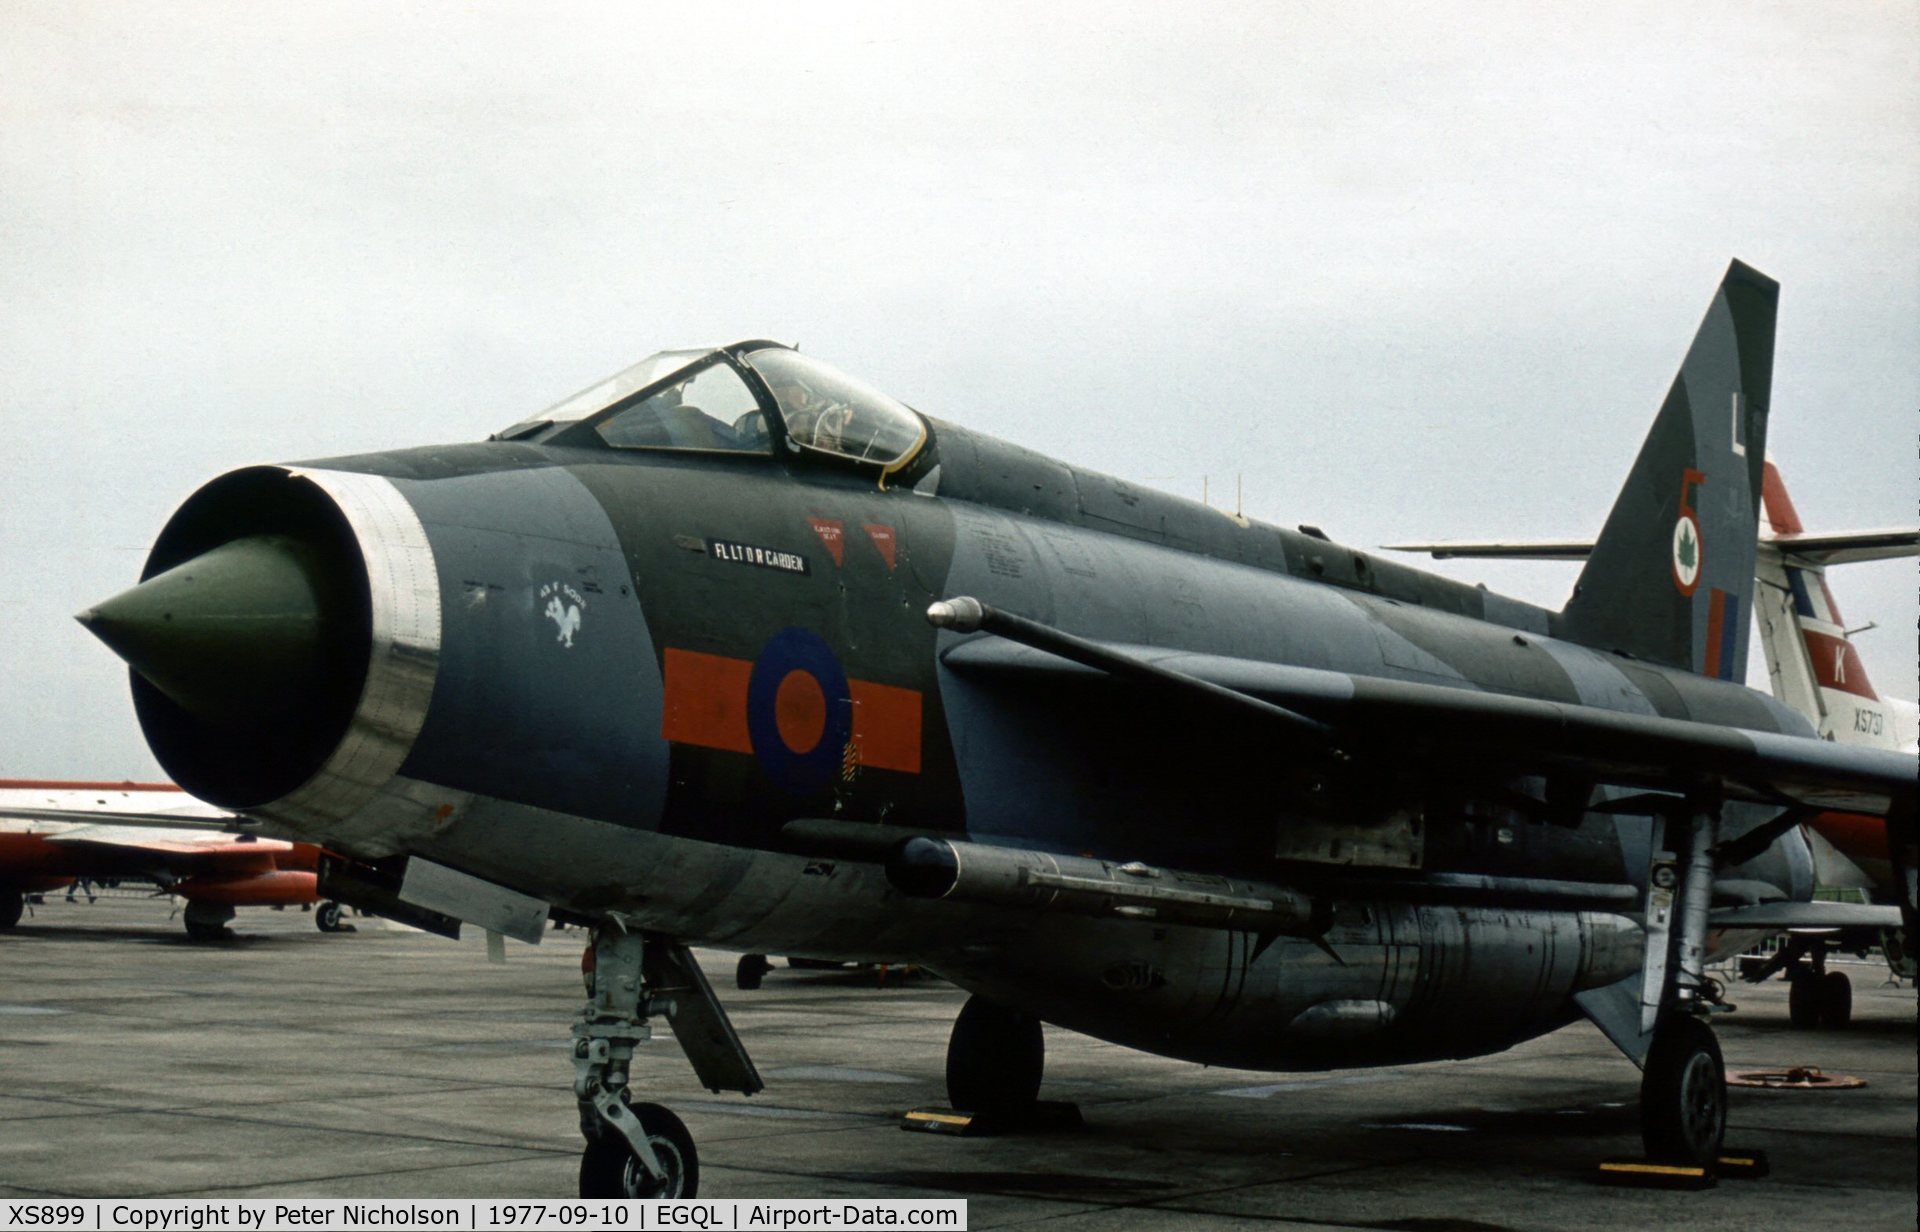 XS899, 1966 English Electric Lightning F.6 C/N 95245, Another view of the 5 Squadron Lightning F.6 displayed at the 1977 RAF Leuchars Airshow.